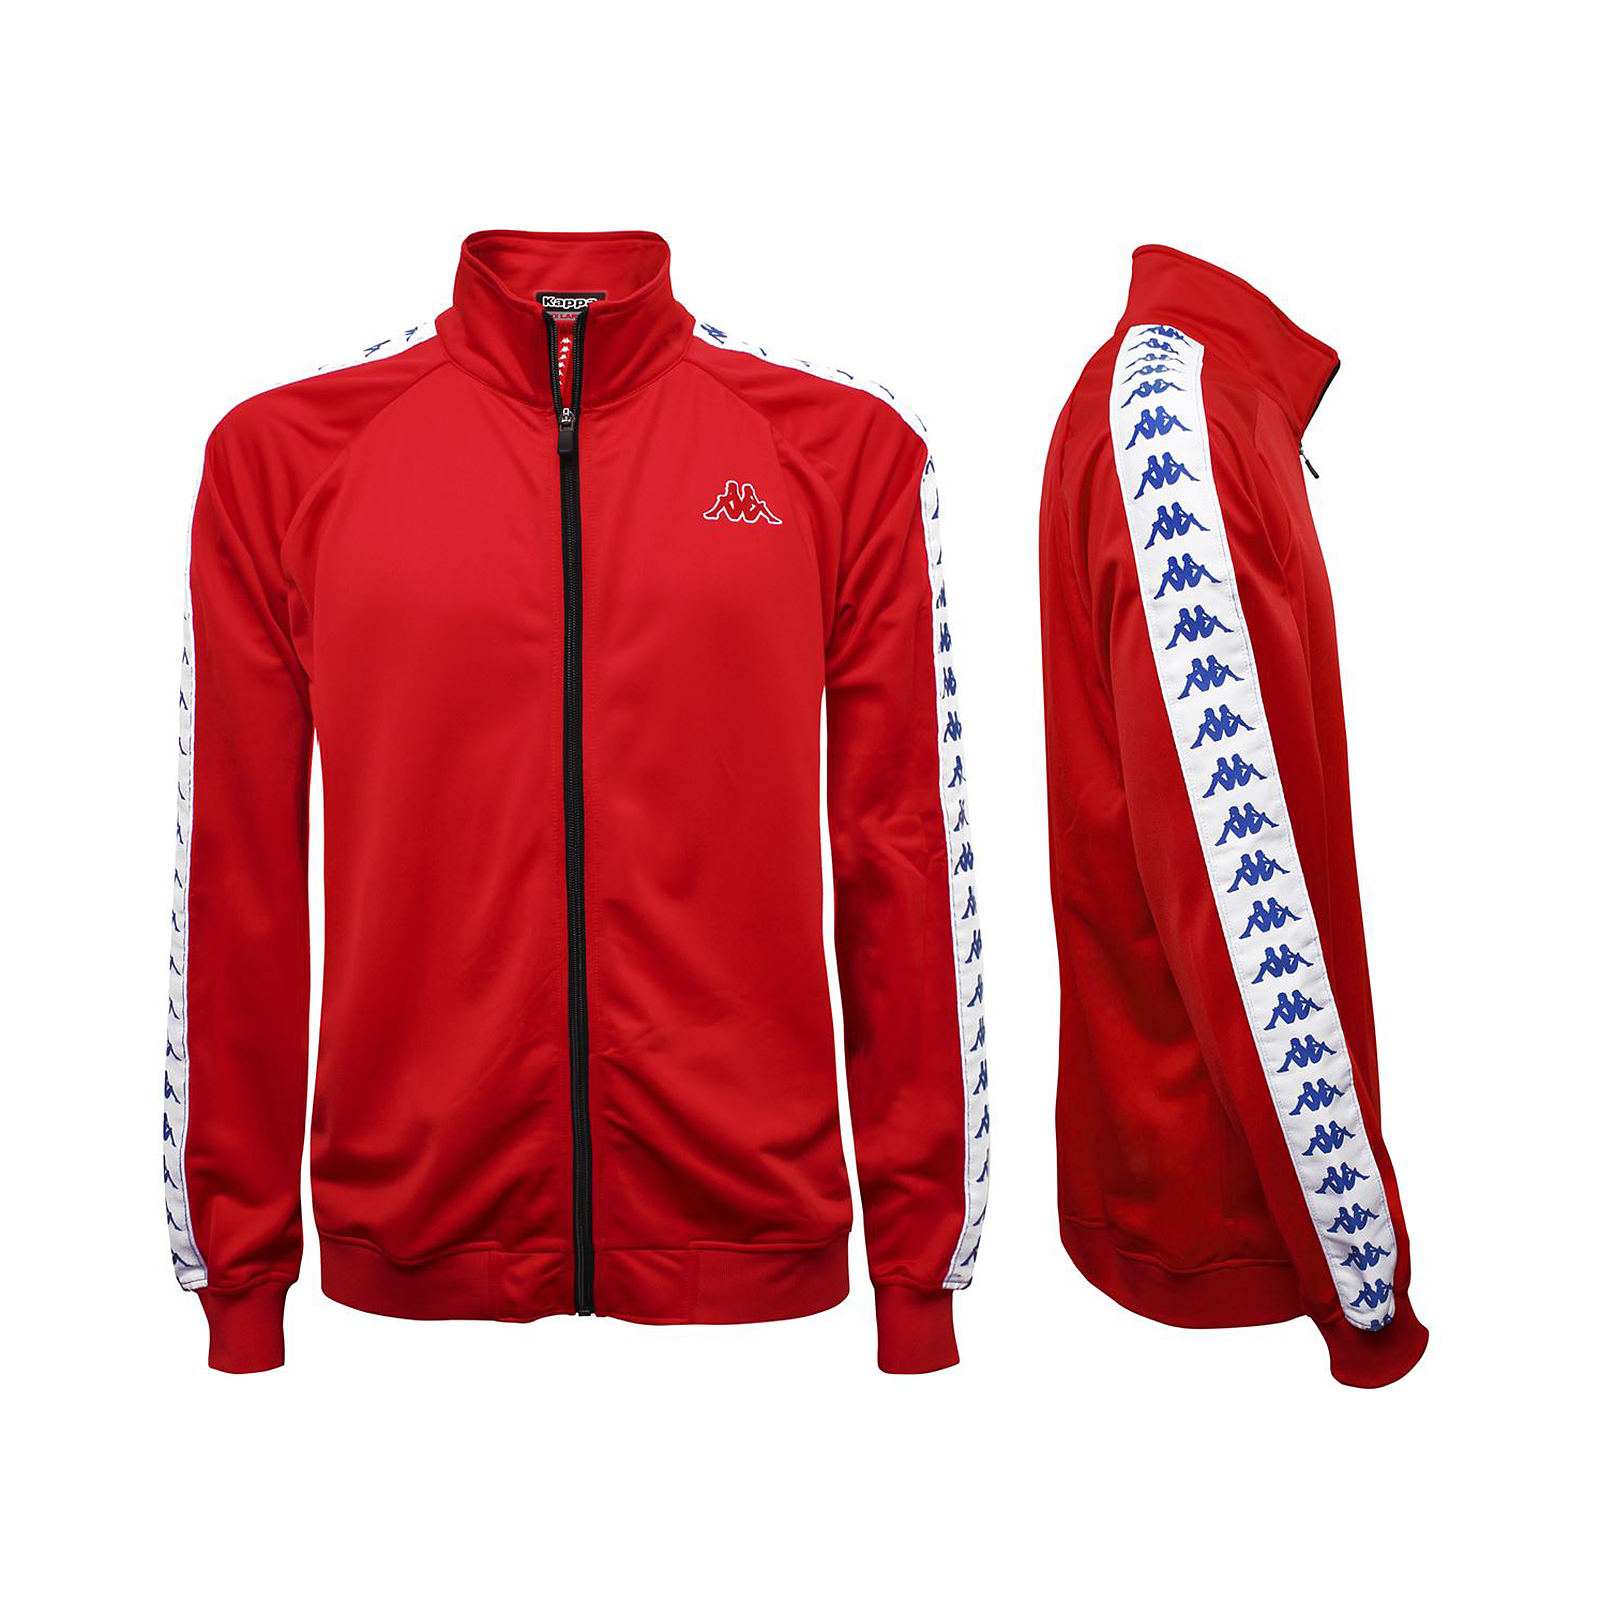 red white and blue kappa jacket